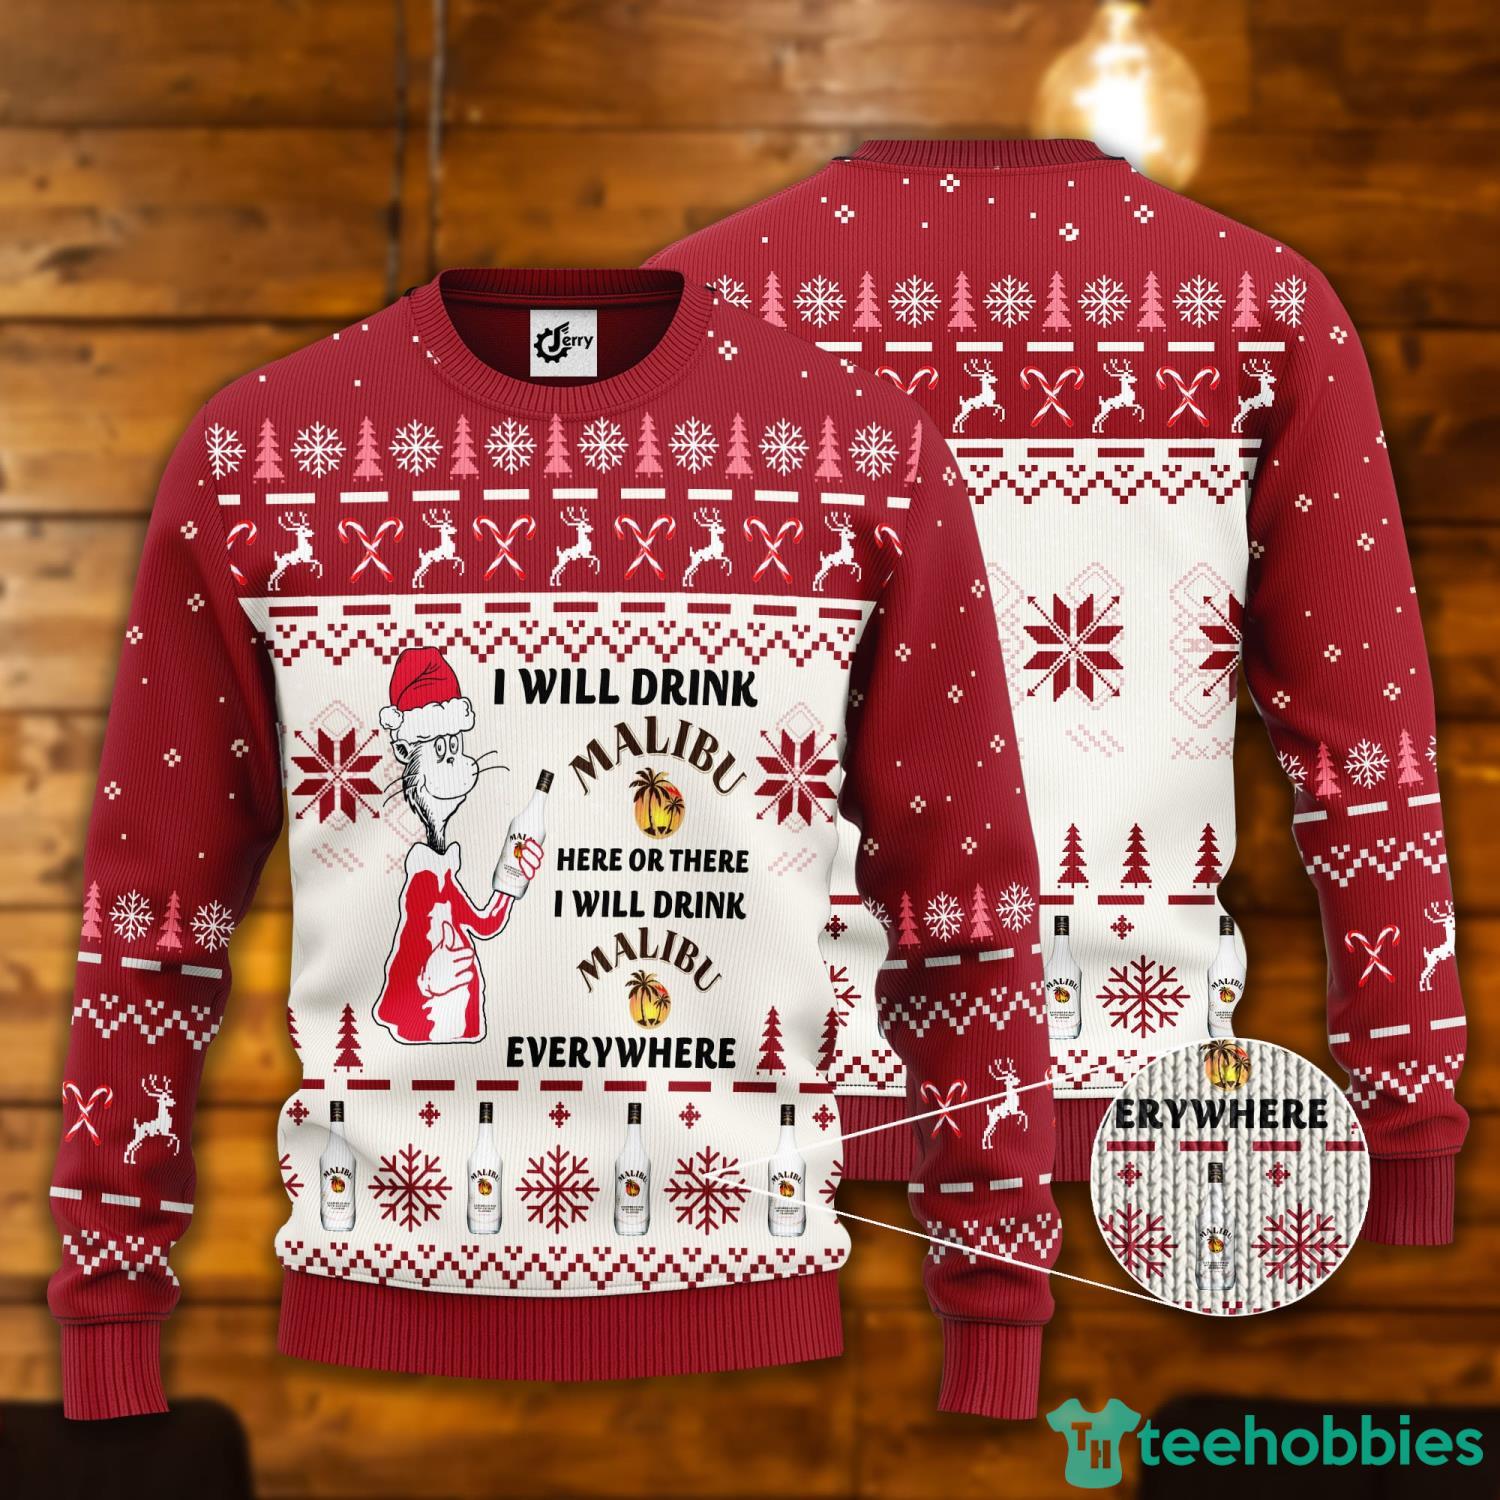 Dr. Seuss I Will Drink Malibu Rum Here Or There Ugly Christmas Sweater Product Photo 1